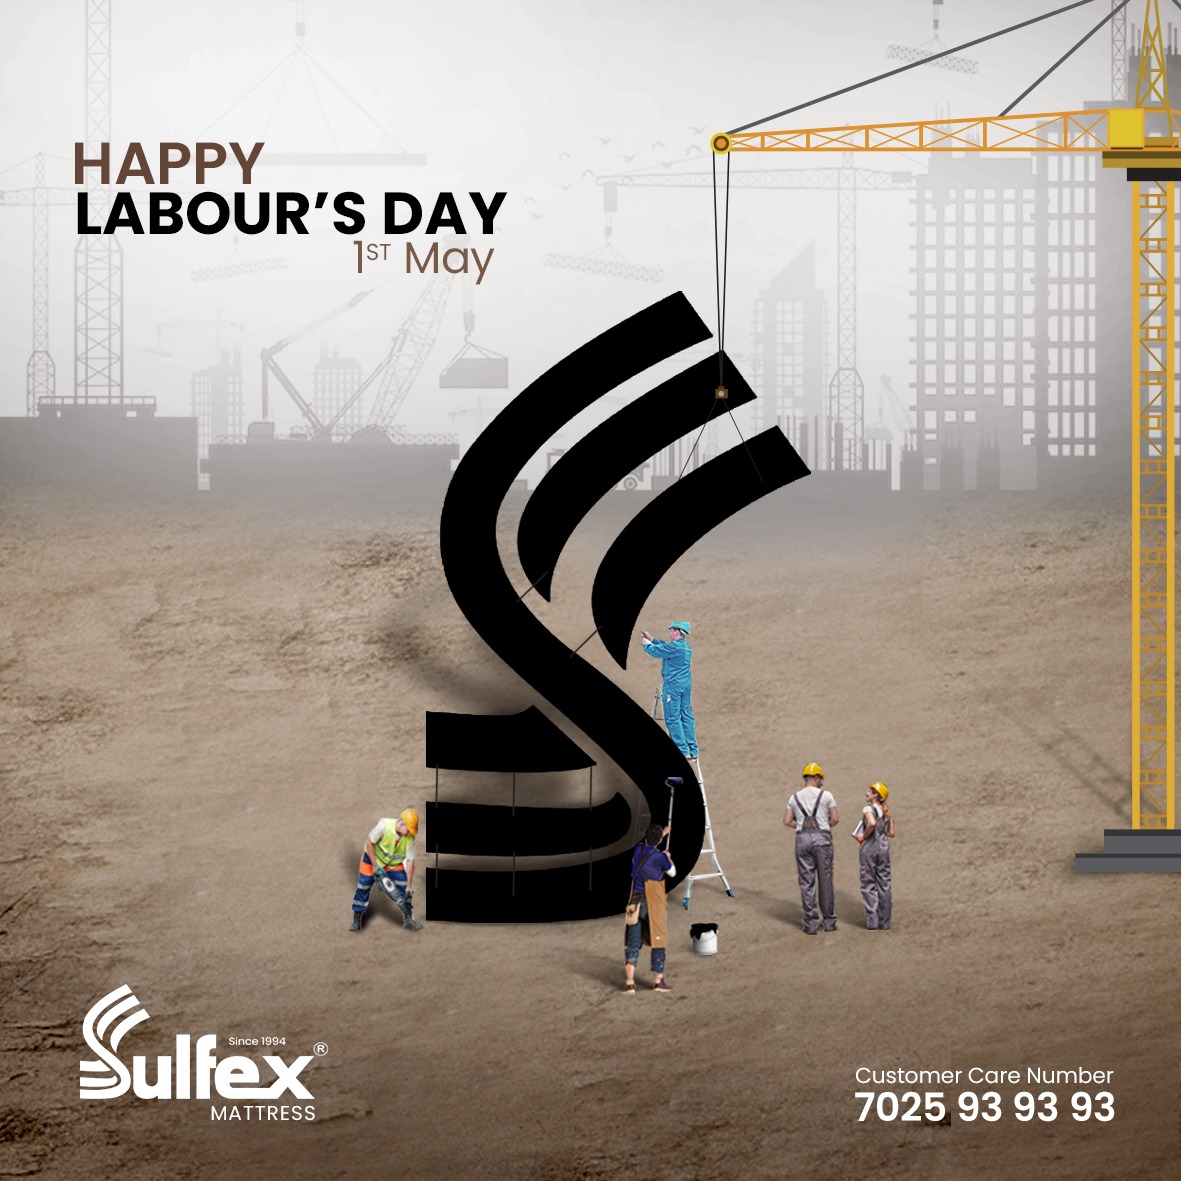 Here's to celebrating the hard work and dedication of all the amazing workers out there.

#LaborDay #HappyLaborDay #LaborDayWeekend #LongWeekend
#ThankYouWorkers #WorkersRights #WorkHardPlayHarder
#RelaxAndRecharge